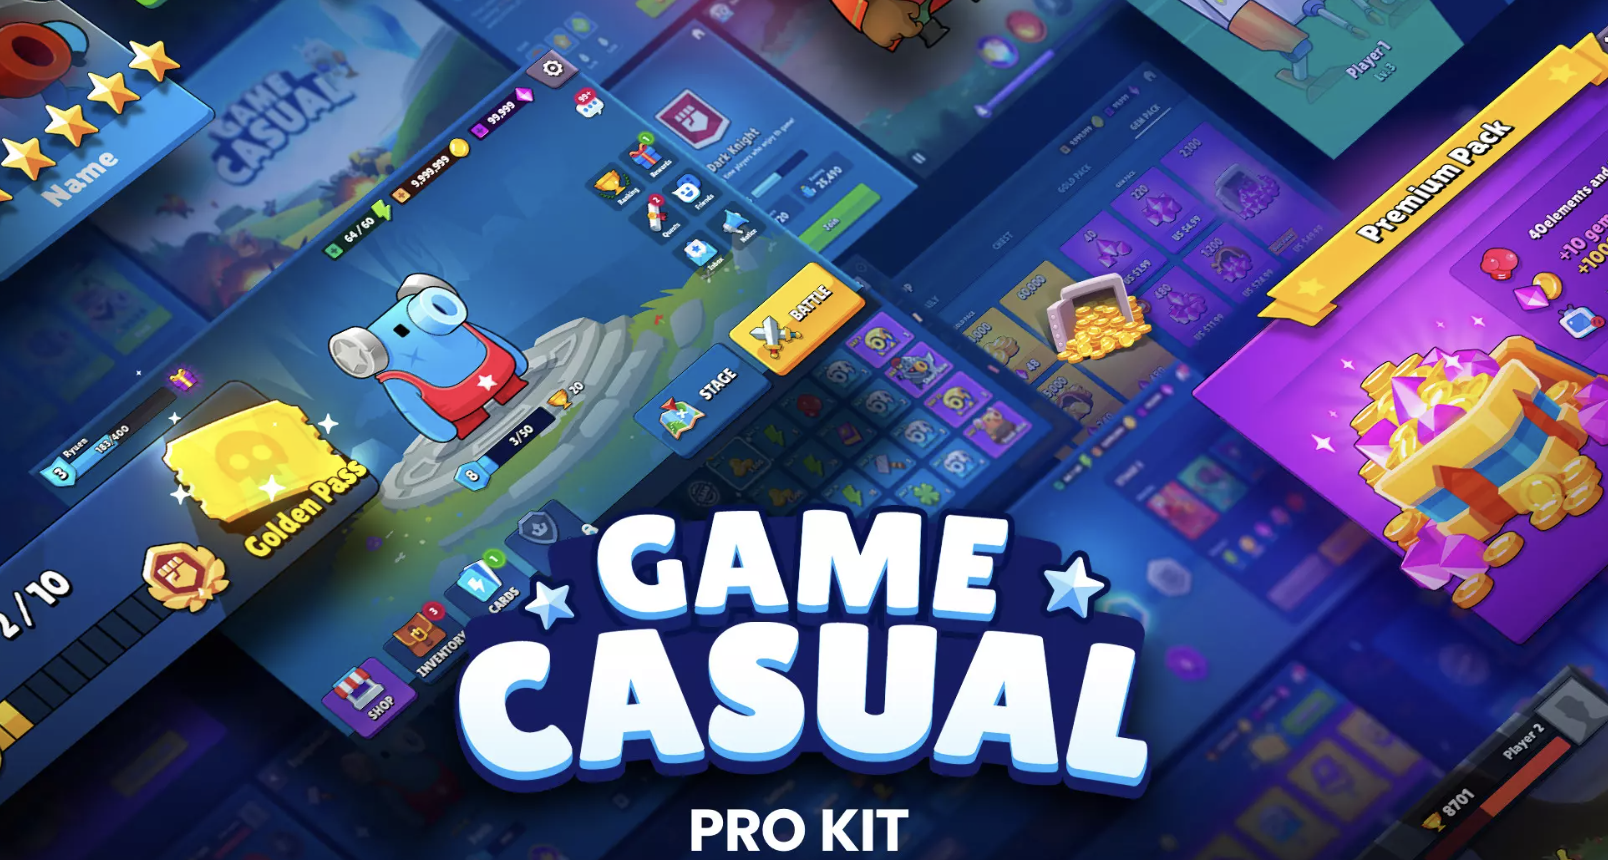 gui-pro-kit-casual-game